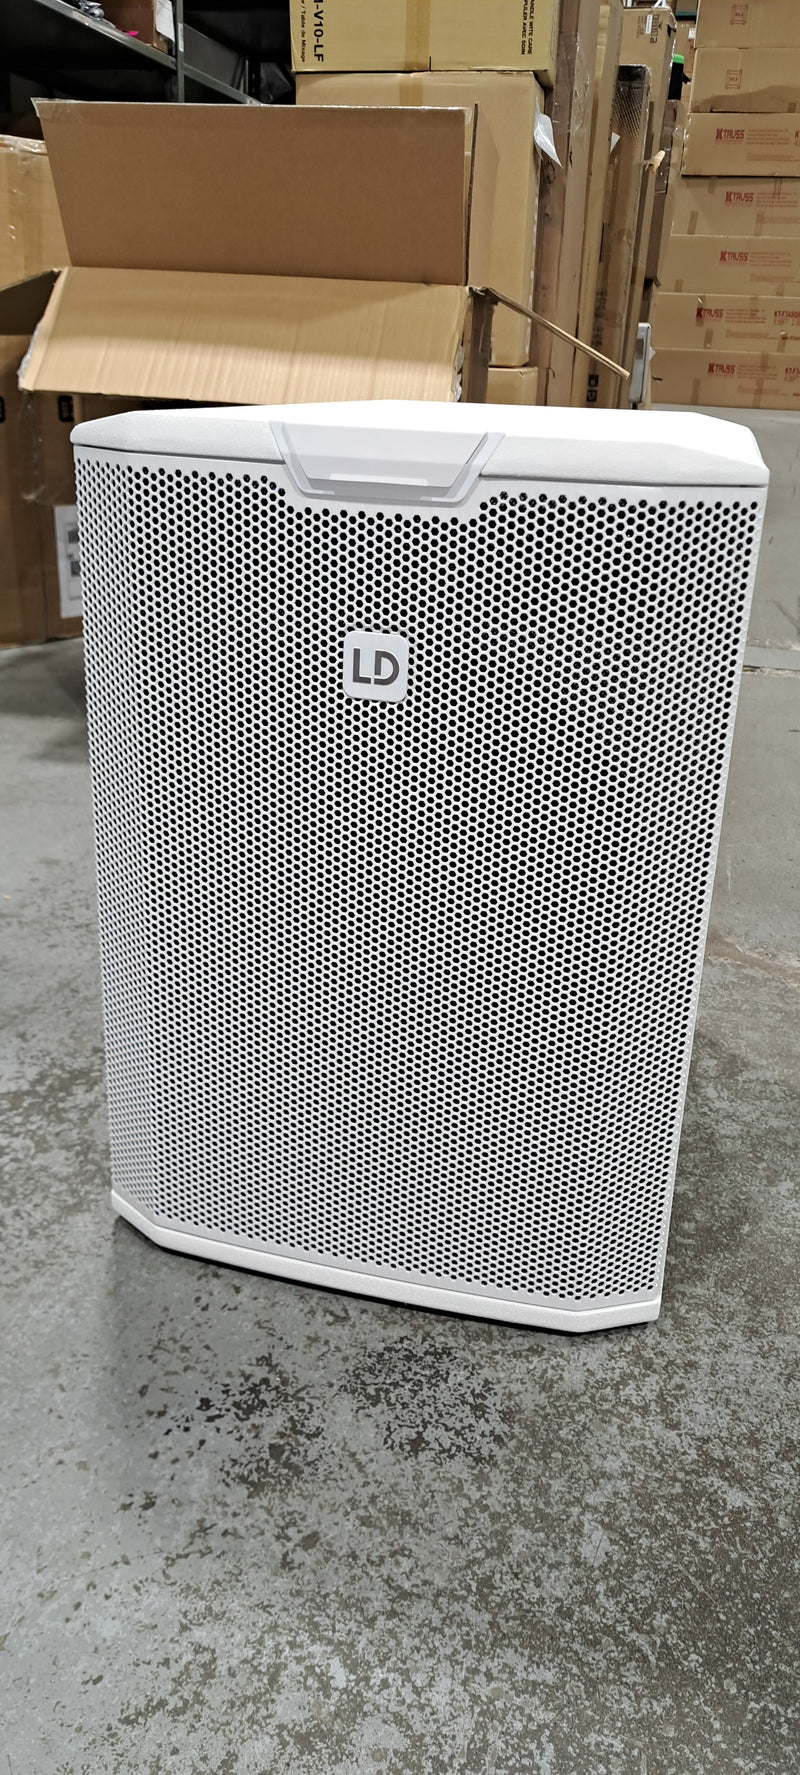 LD Systems MAUI 28 G3 W Compact Cardioid Column PA System (White) (DEMO)